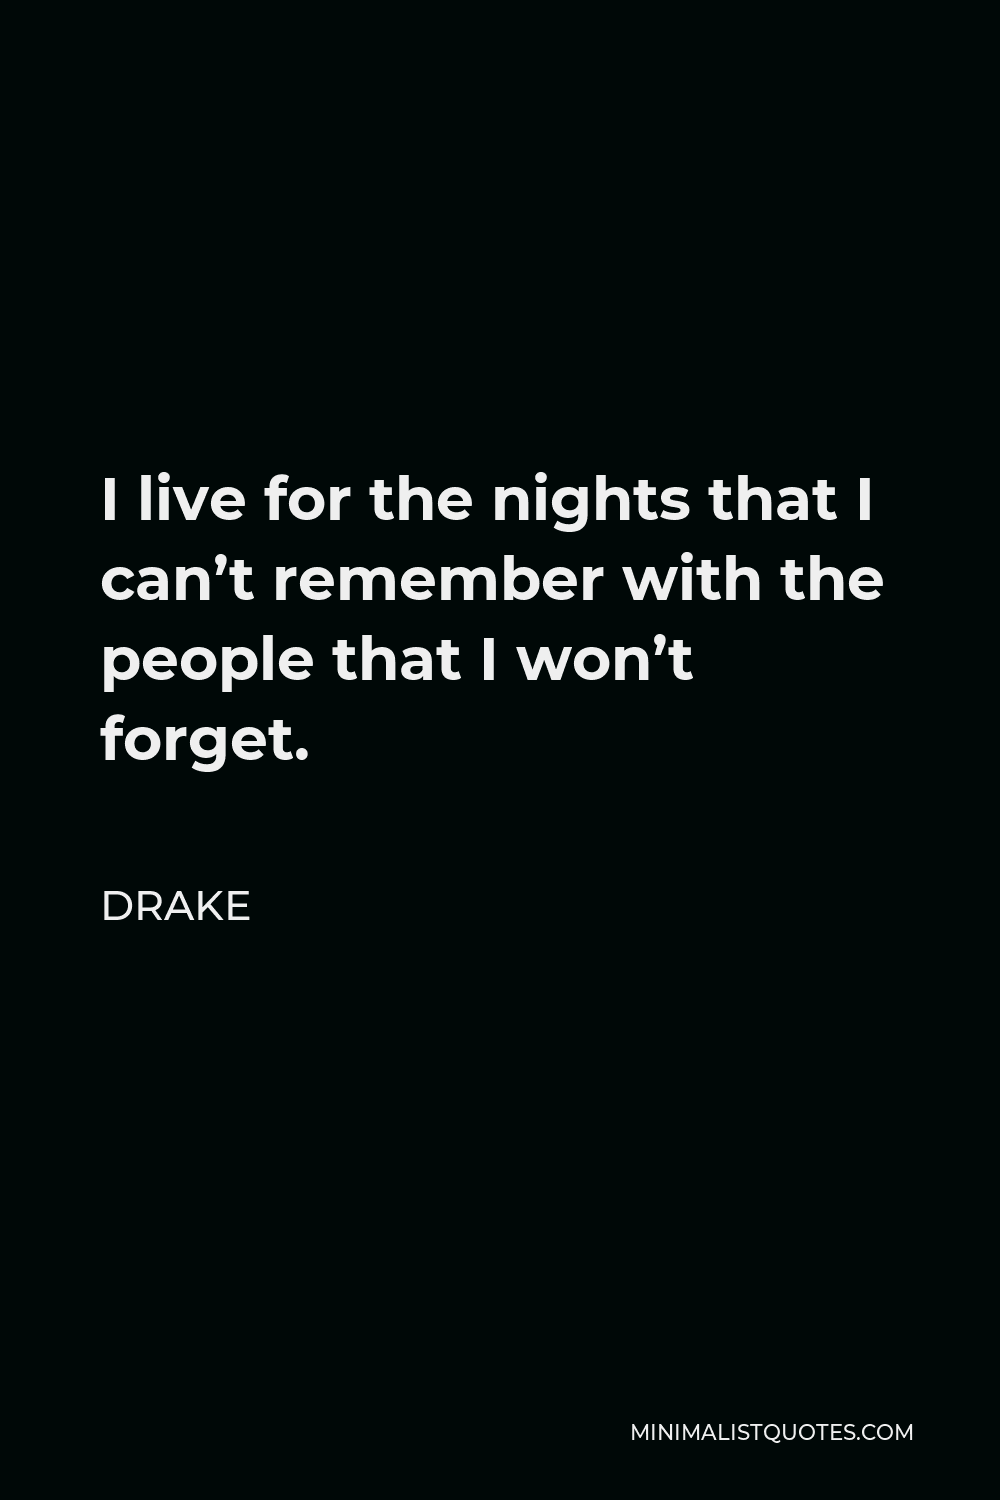 Drake Quote I Live For The Nights That I Can T Remember With The People That I Won T Forget